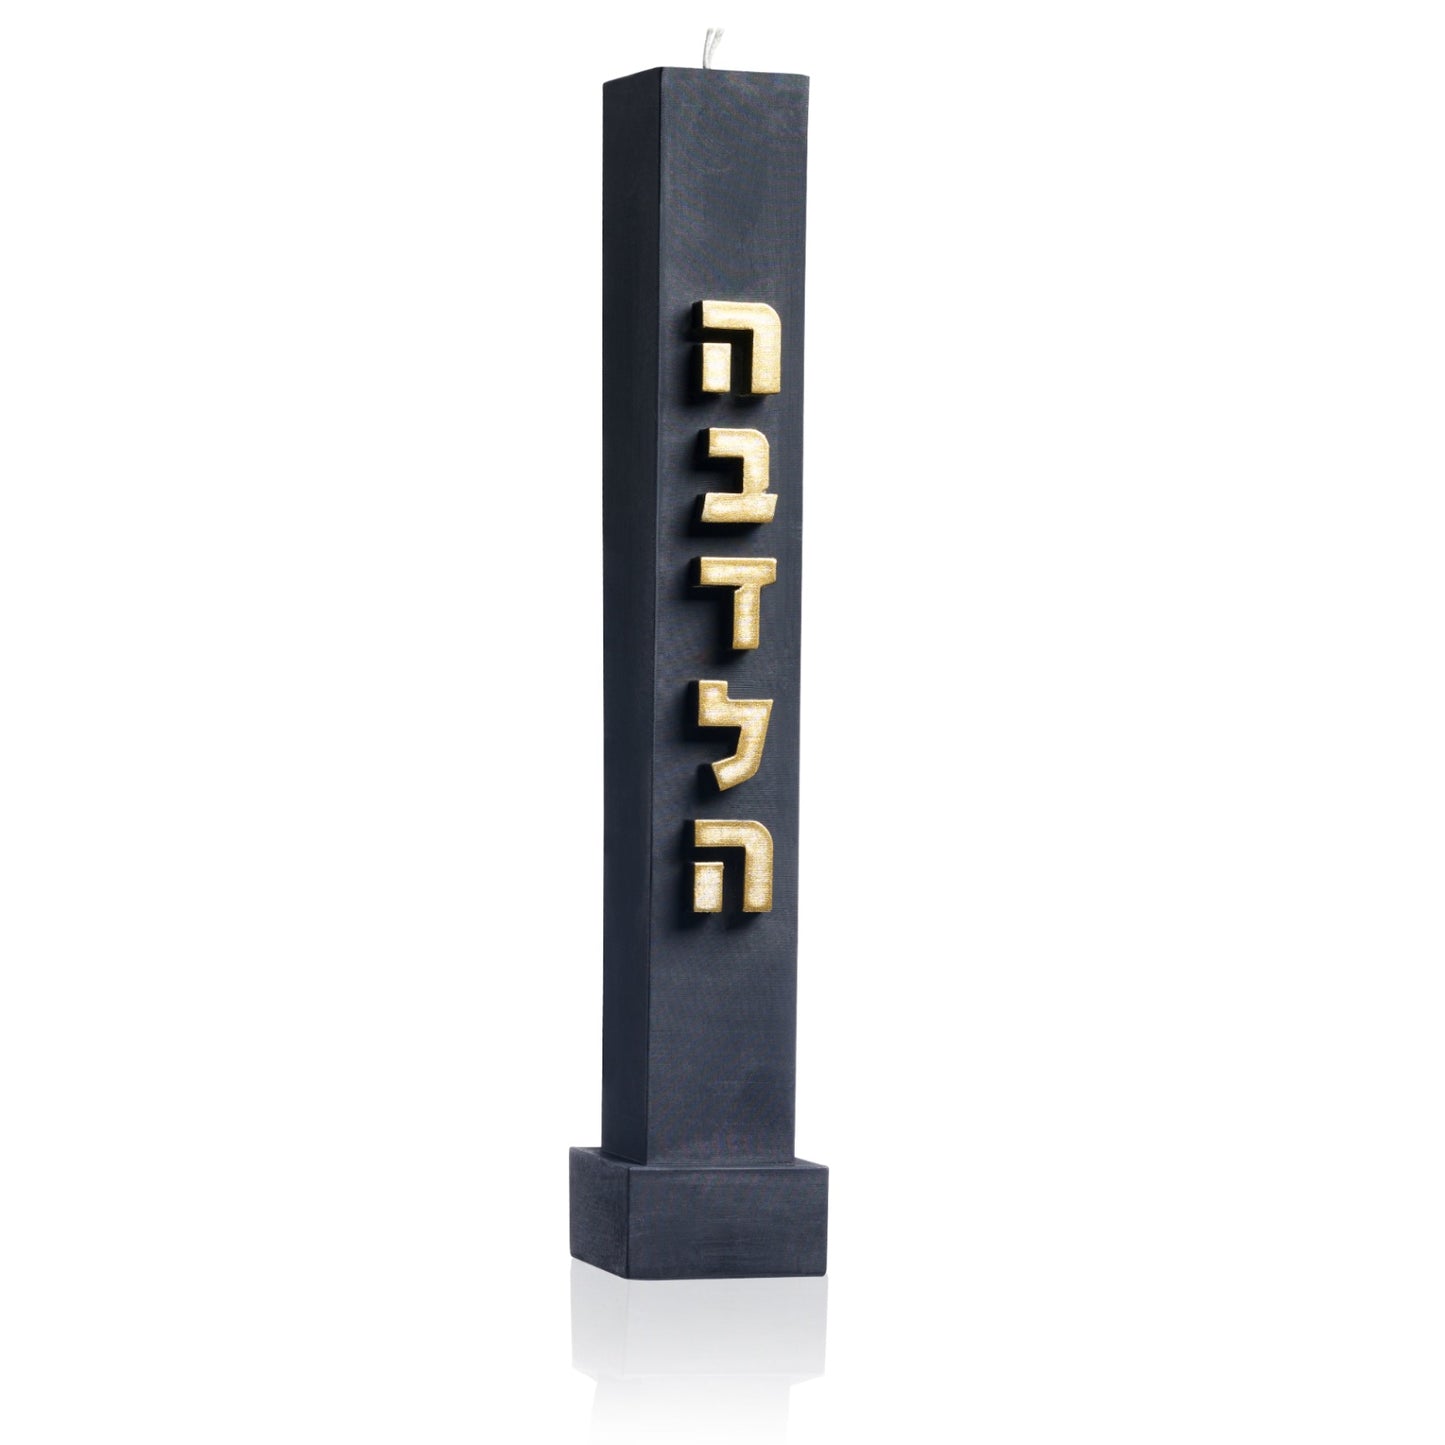 Embossed Havdallah Candle